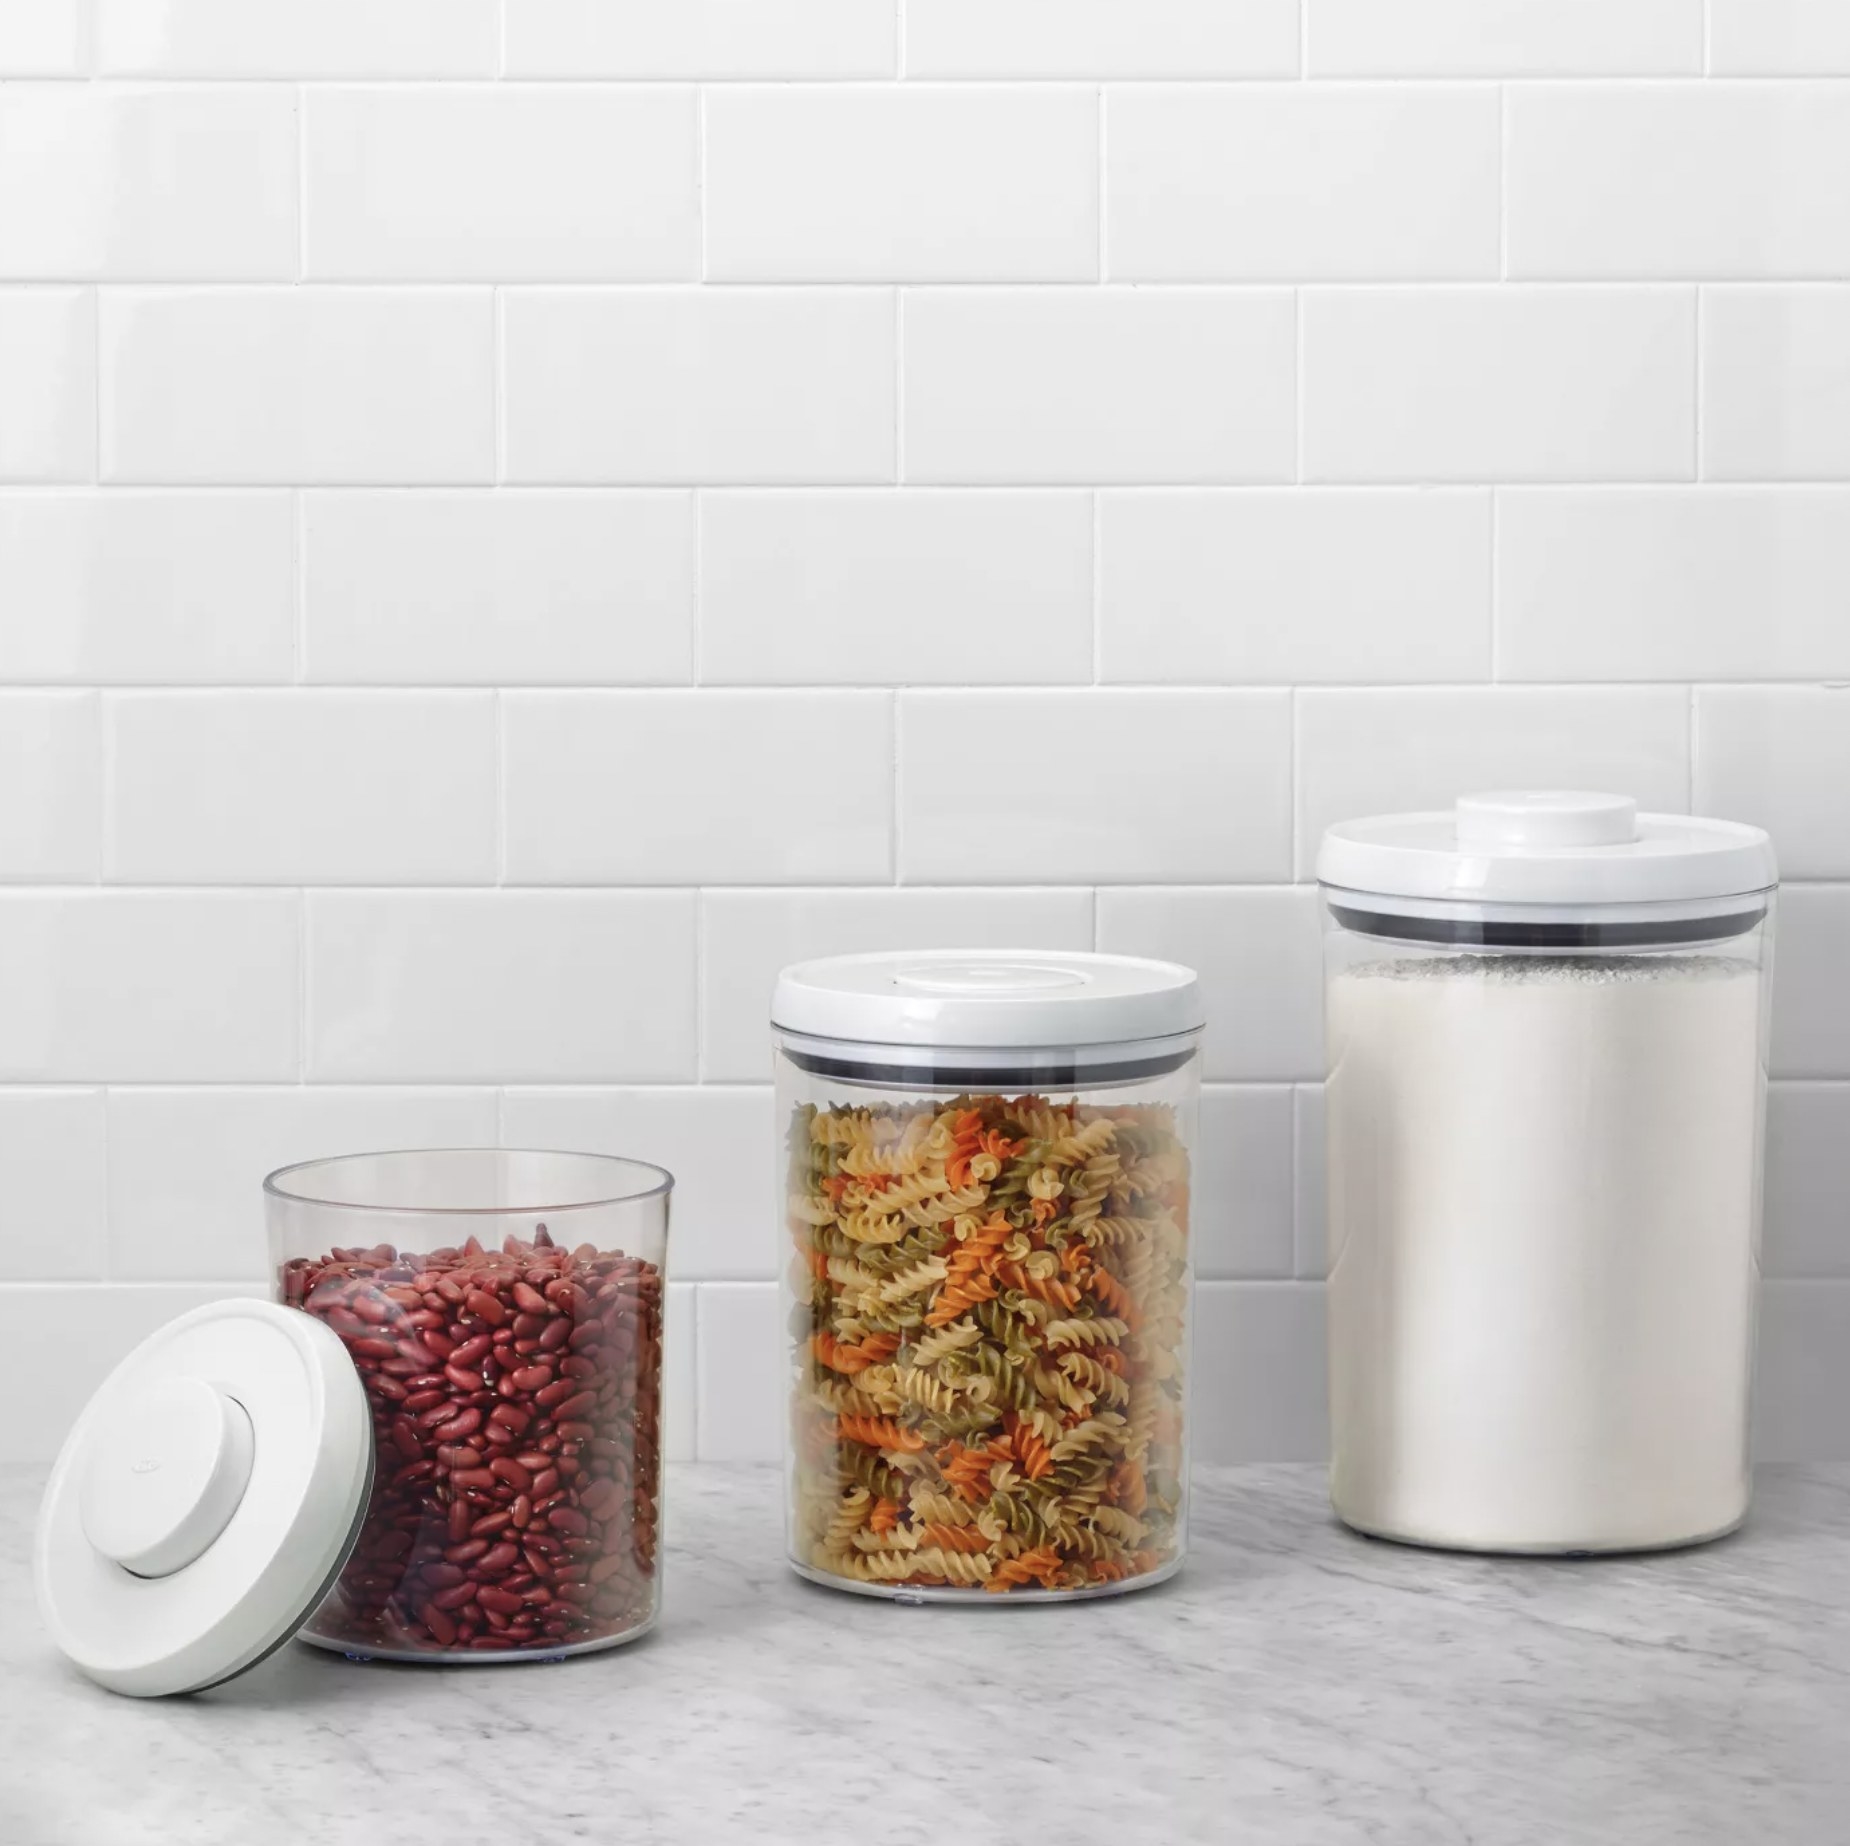 The cylinder-shaped OXO Food Containers